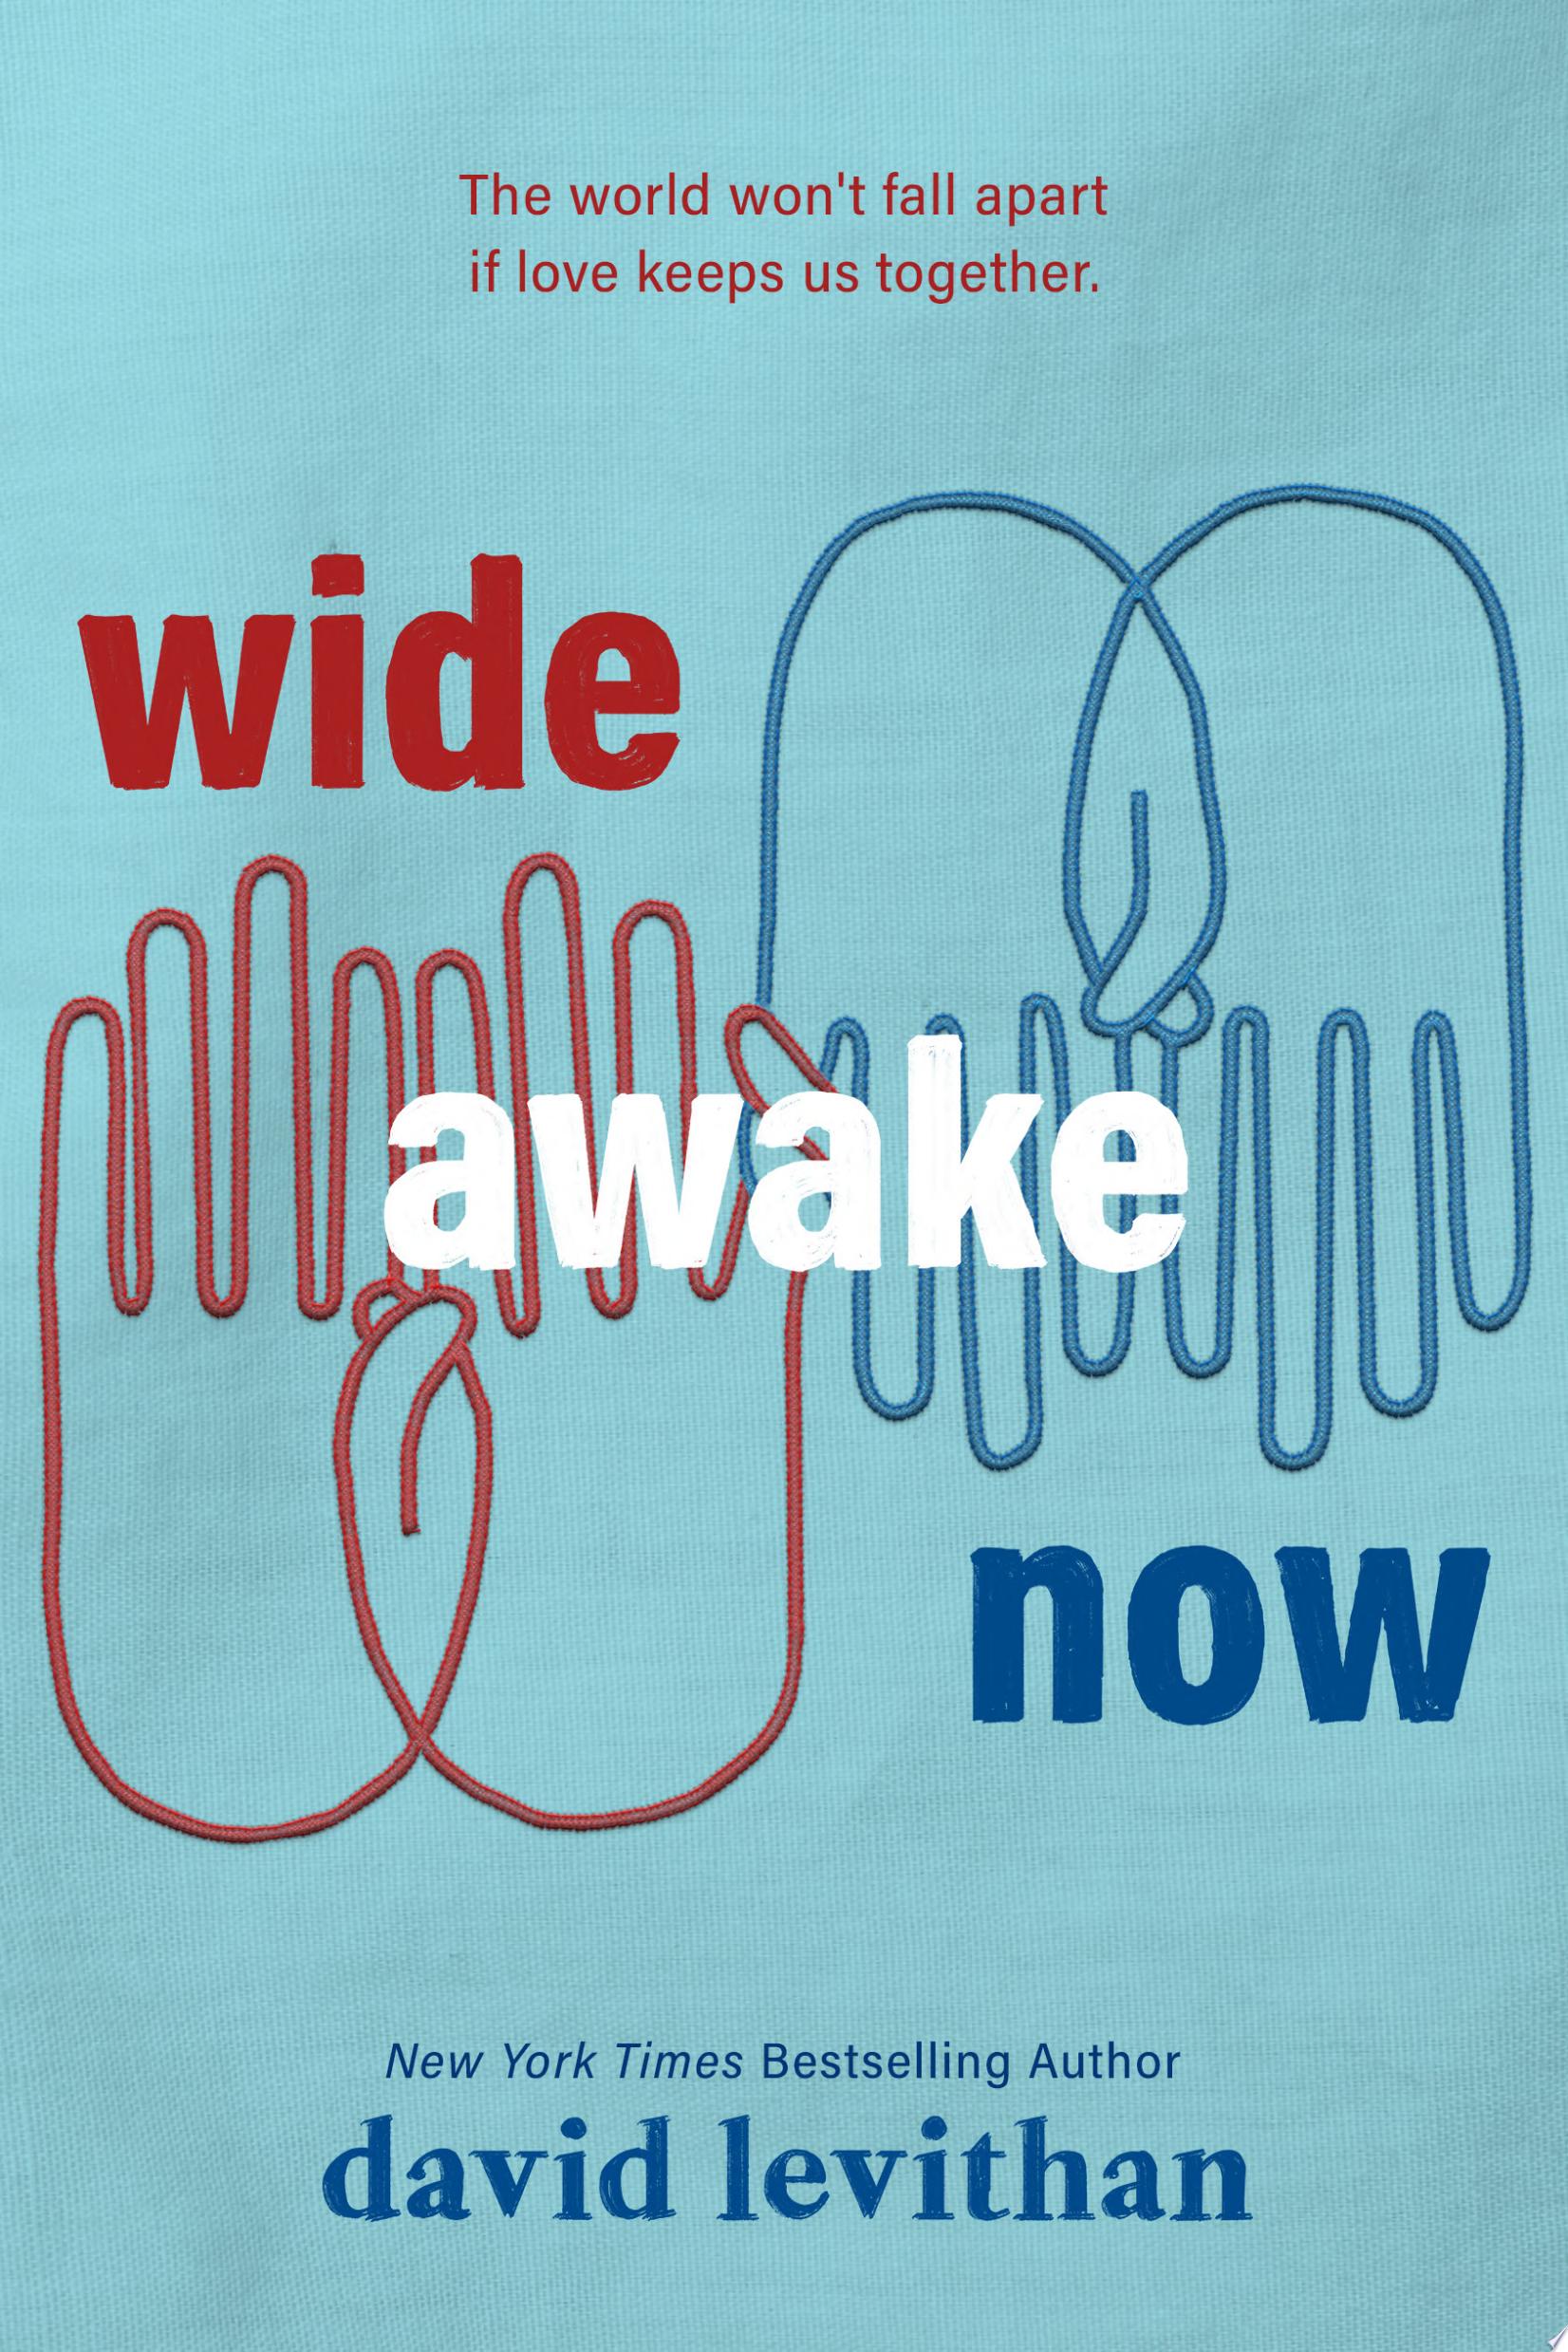 Image for "Wide Awake Now"